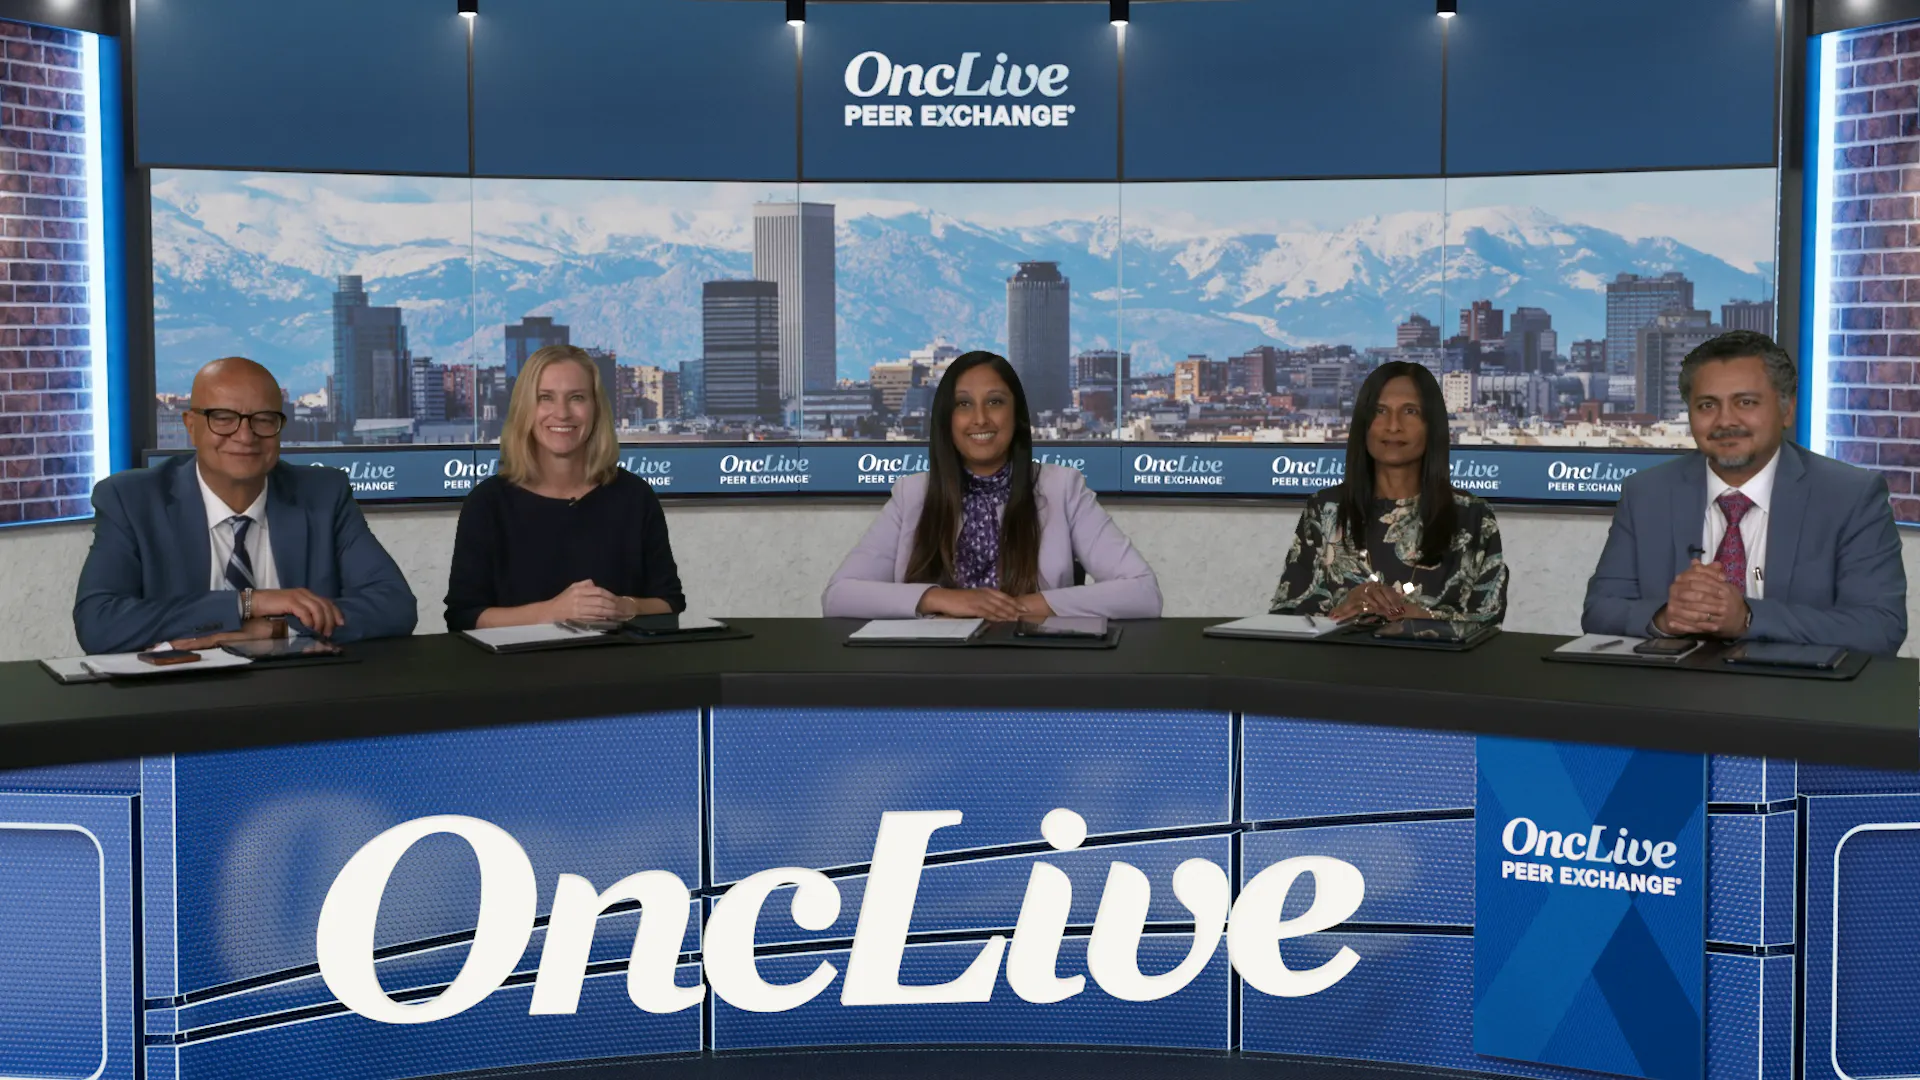 A panel of 5 experts on multiple myeloma